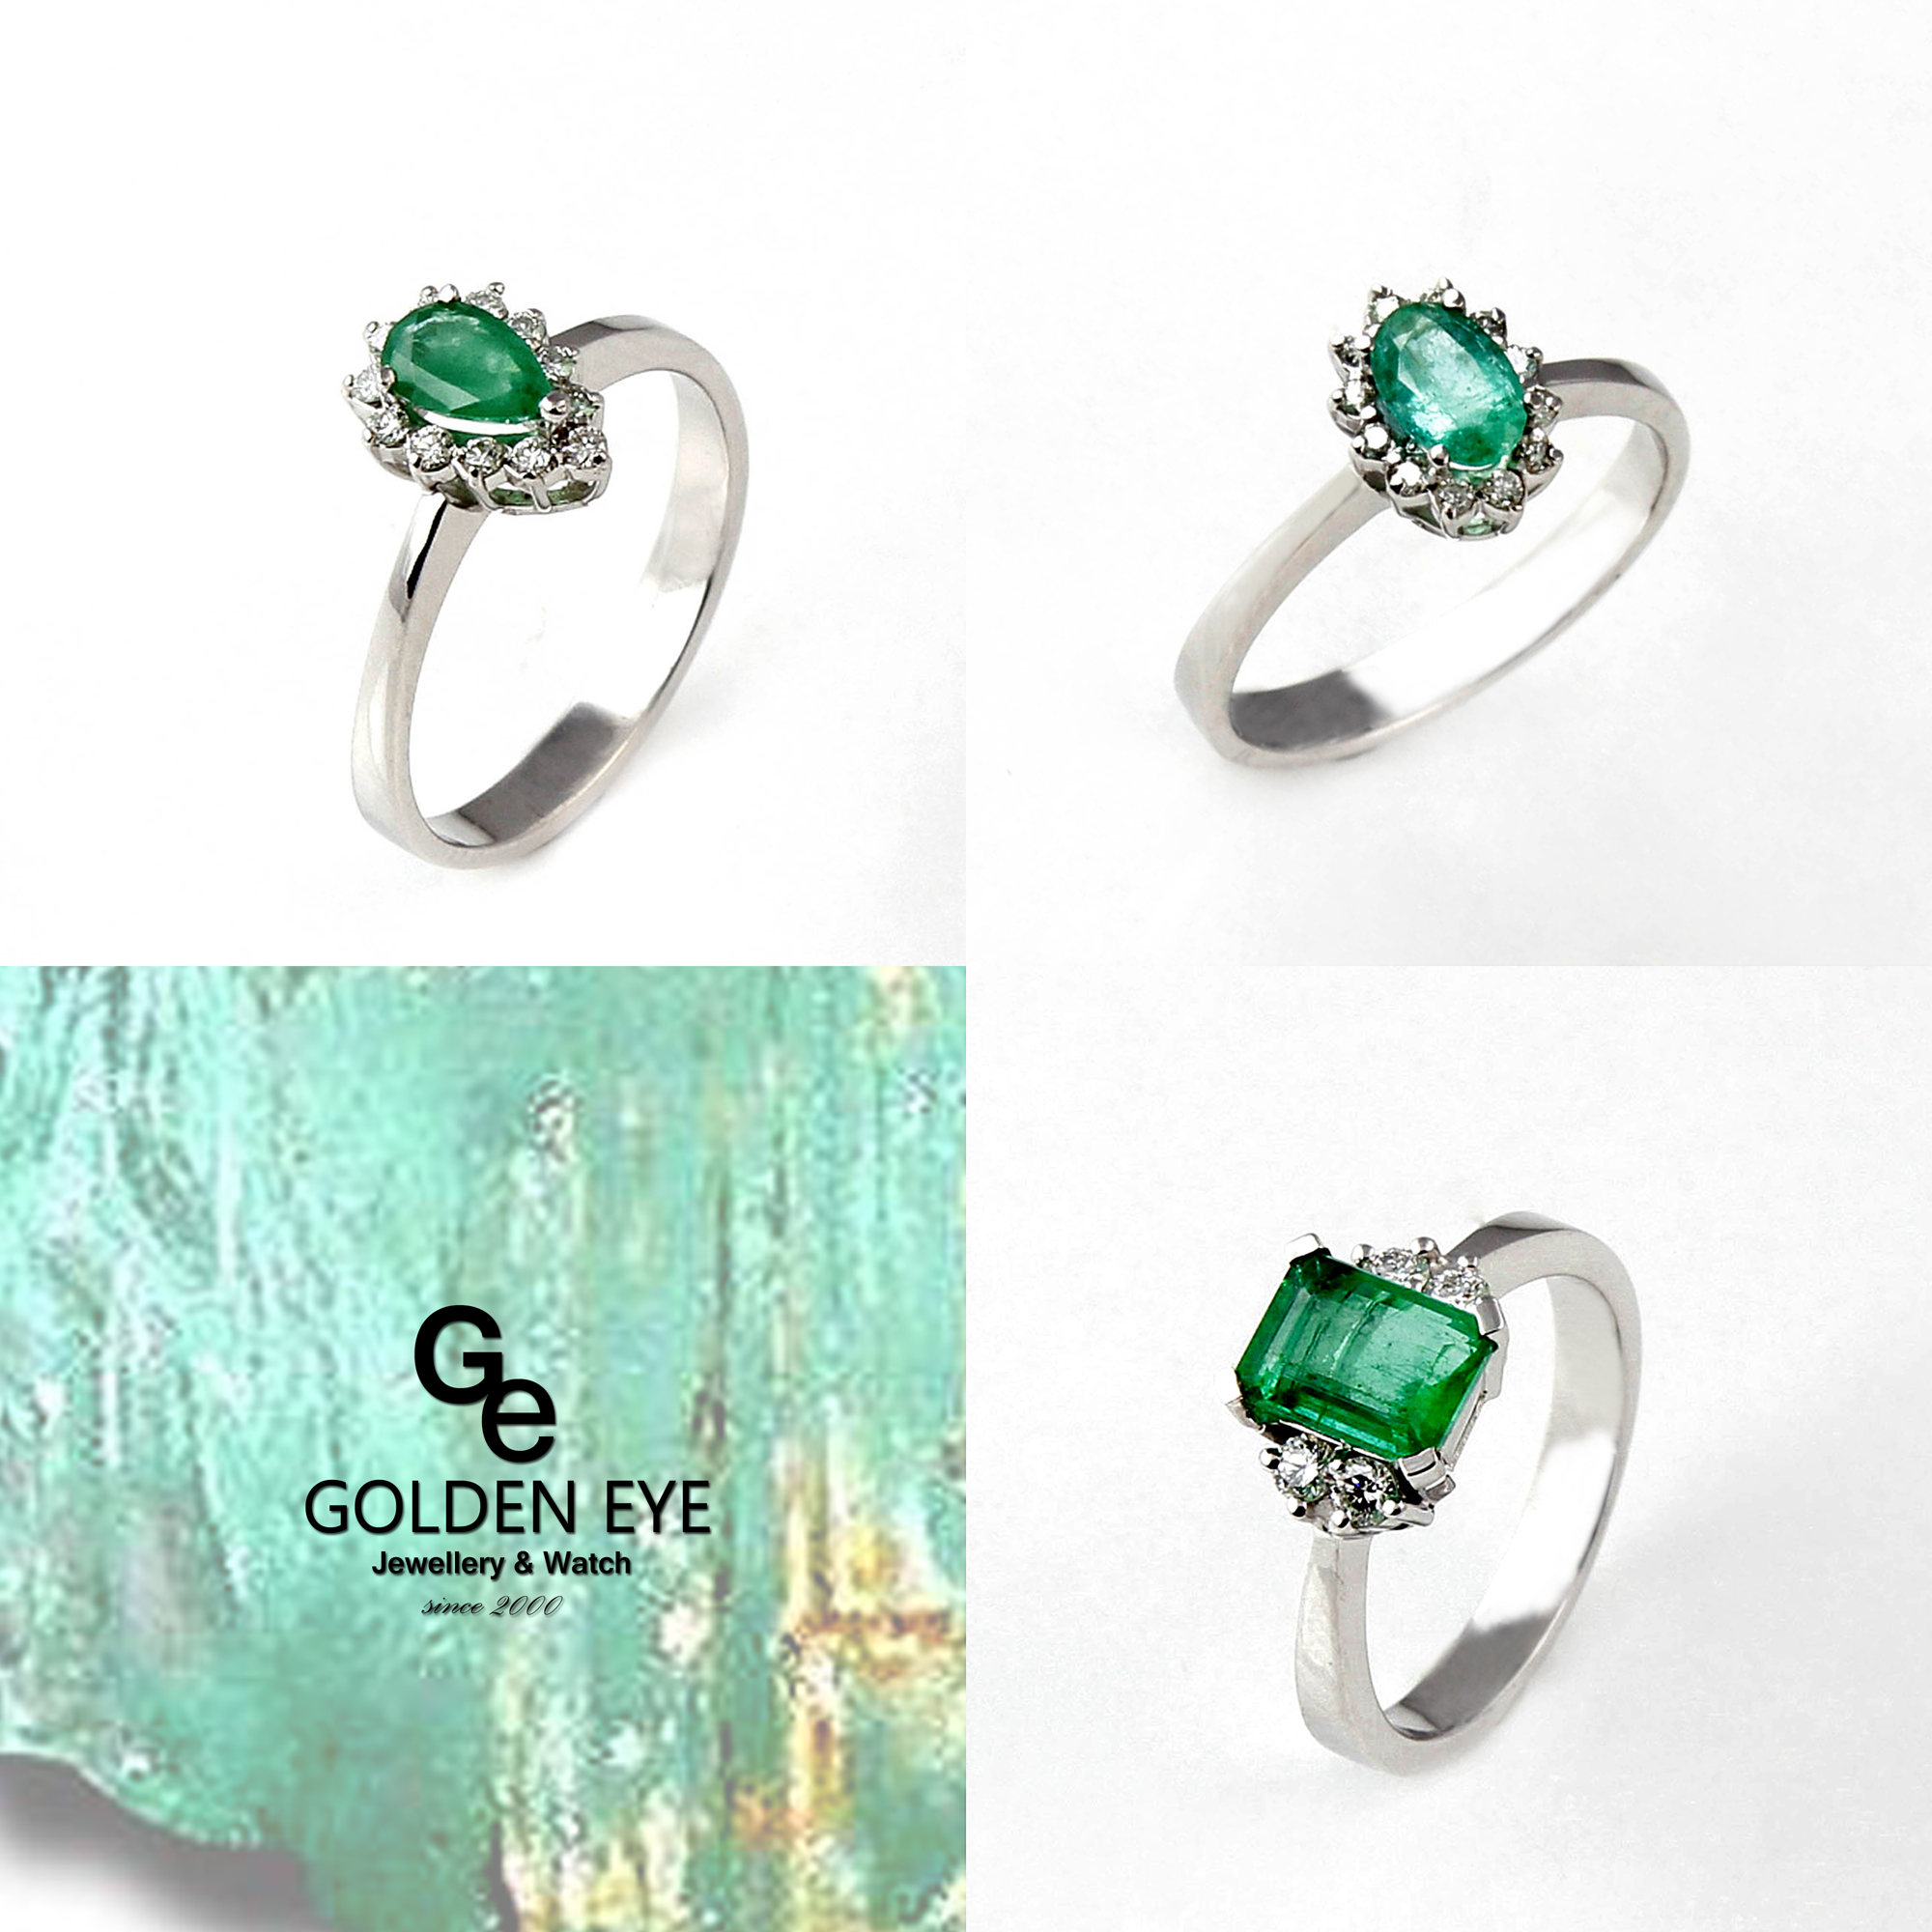 R035B White Gold Ring with Emerald and Diamonds